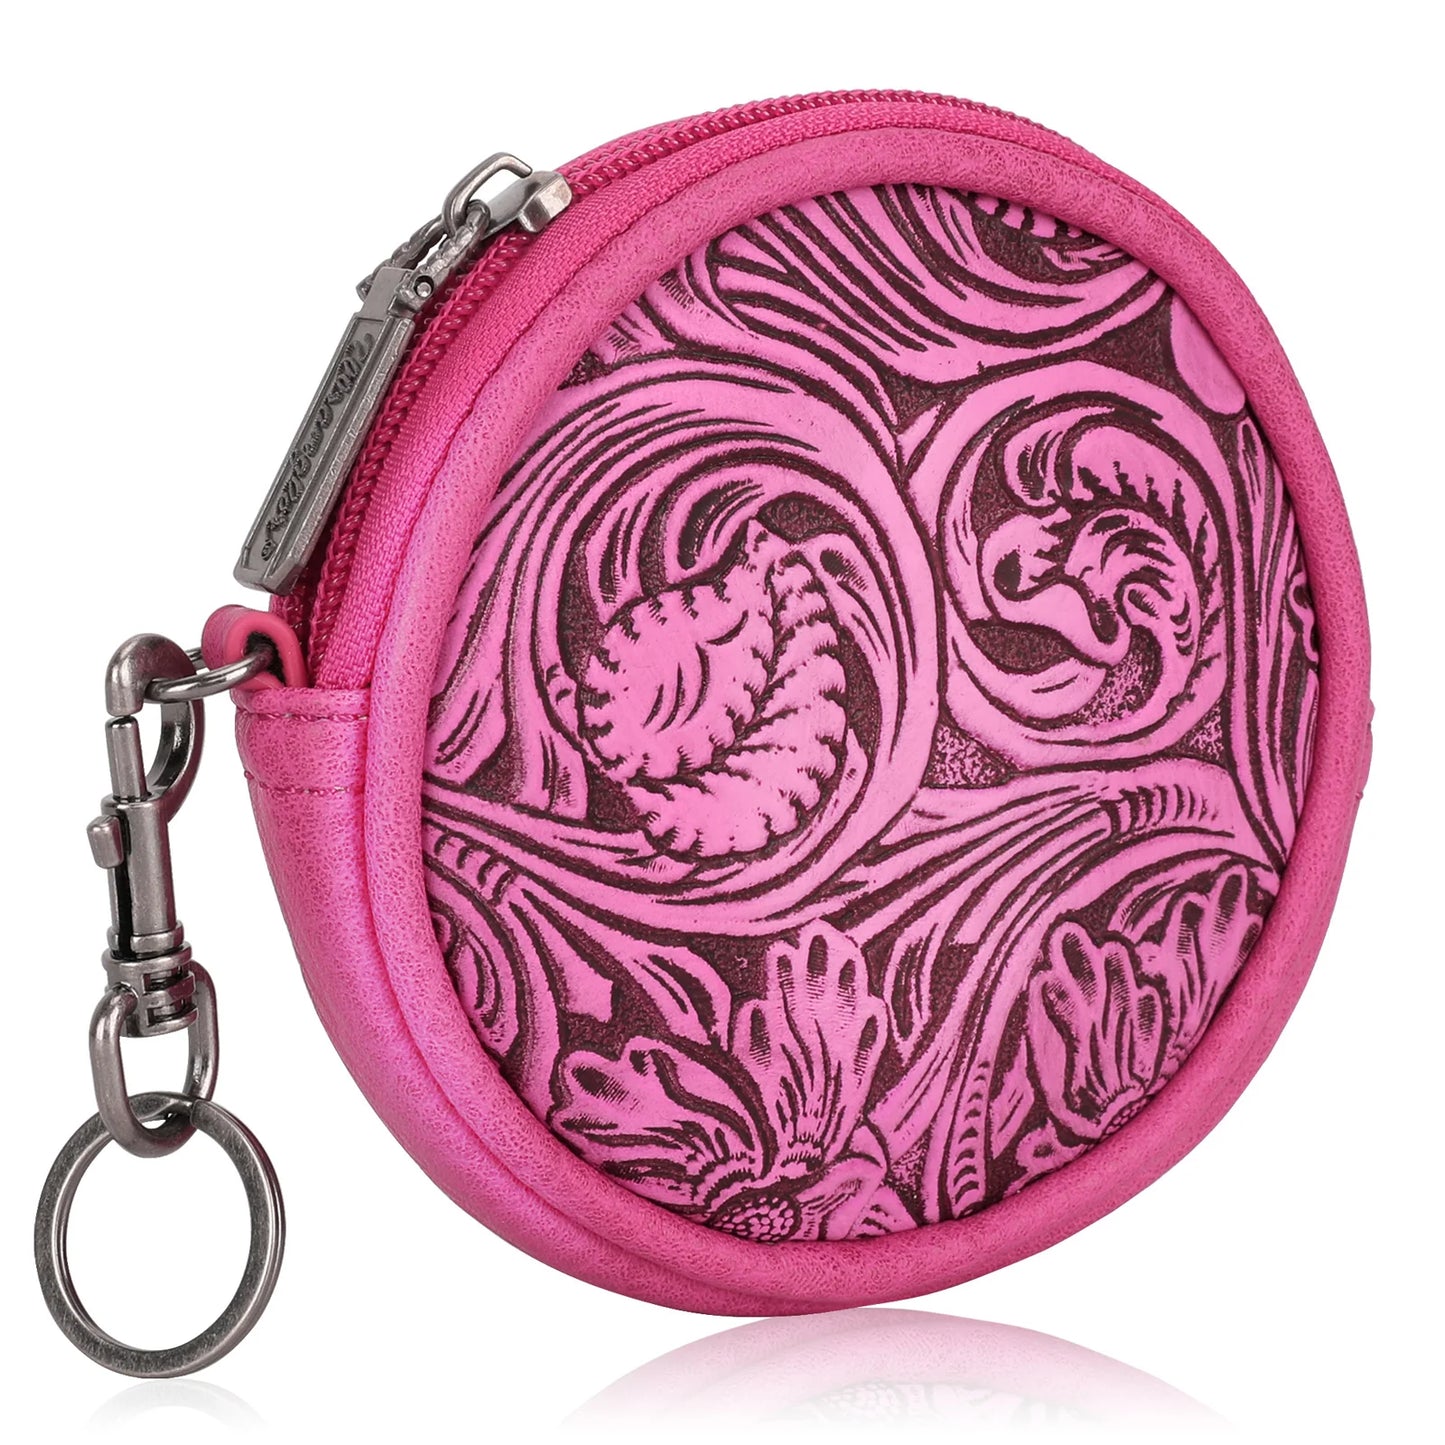 Wrangler Floral Tooled Circular Pouch (Assorted)